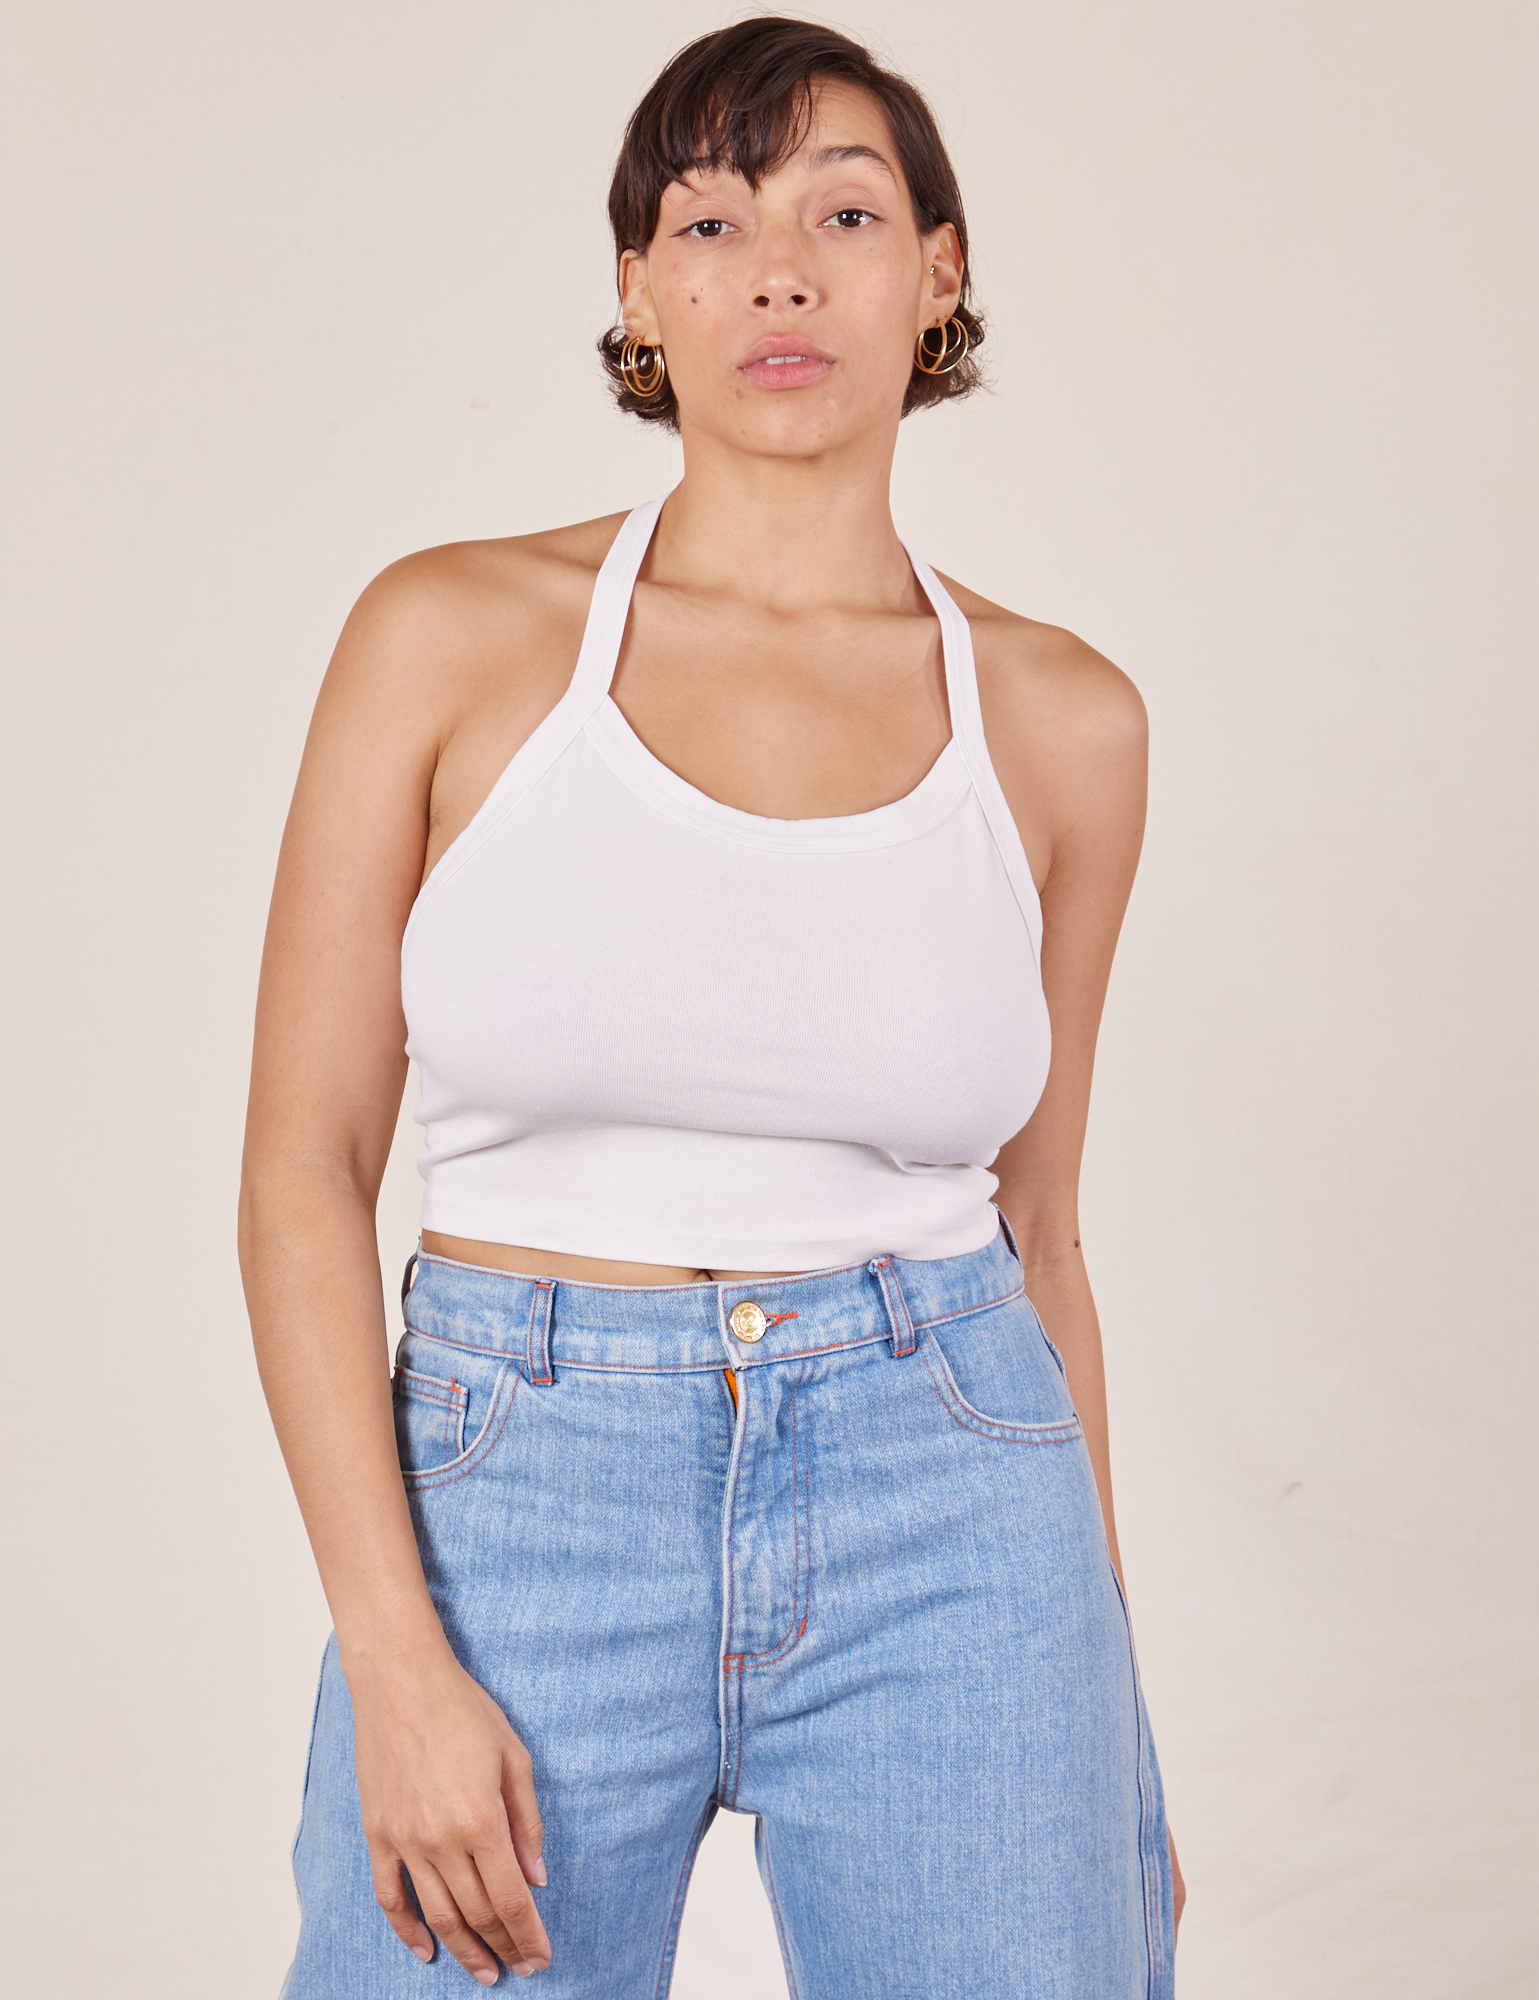 Tiara is 5&#39;4&quot; and wearing XS Halter Top in Vintage Off-White paired with light wash Sailor Jeans